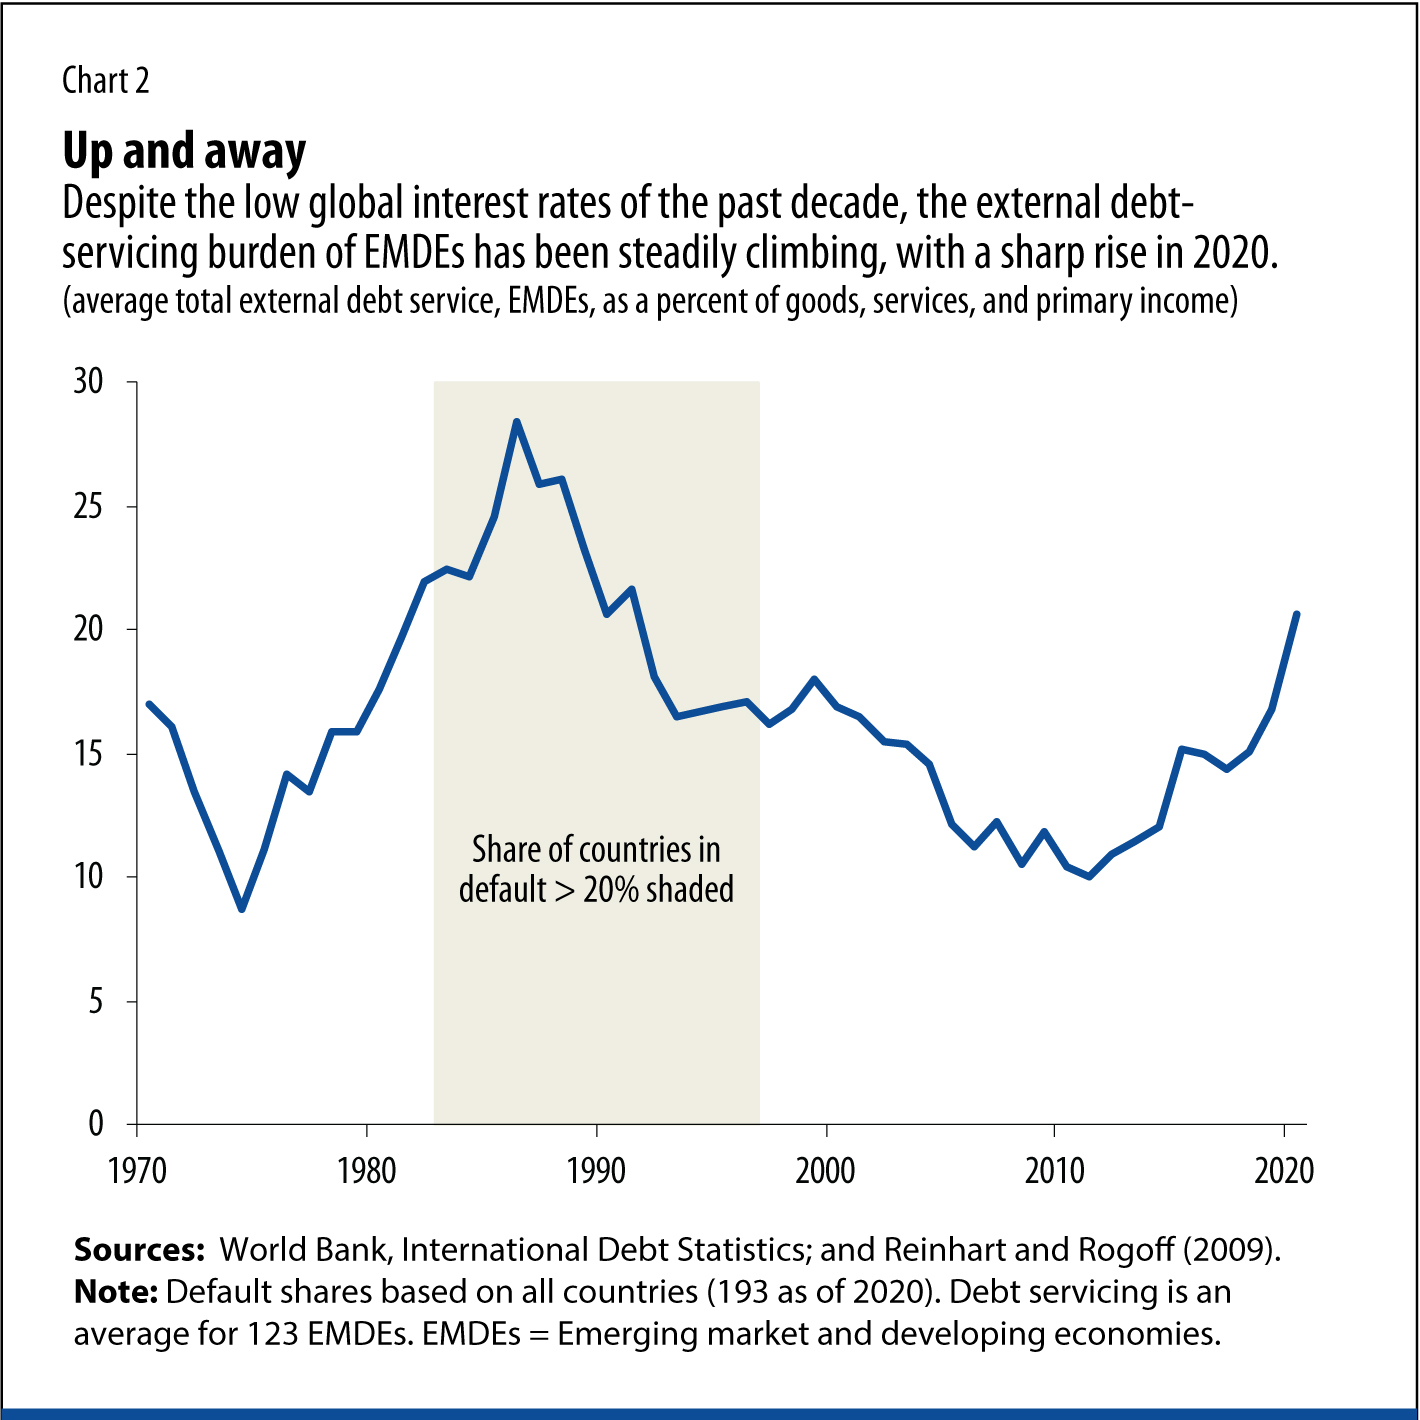 Despite the low global interest rates of the past decade, the external debtservicing burden of EMDEs has been steadily climbing, with a sharp rise in 2020.